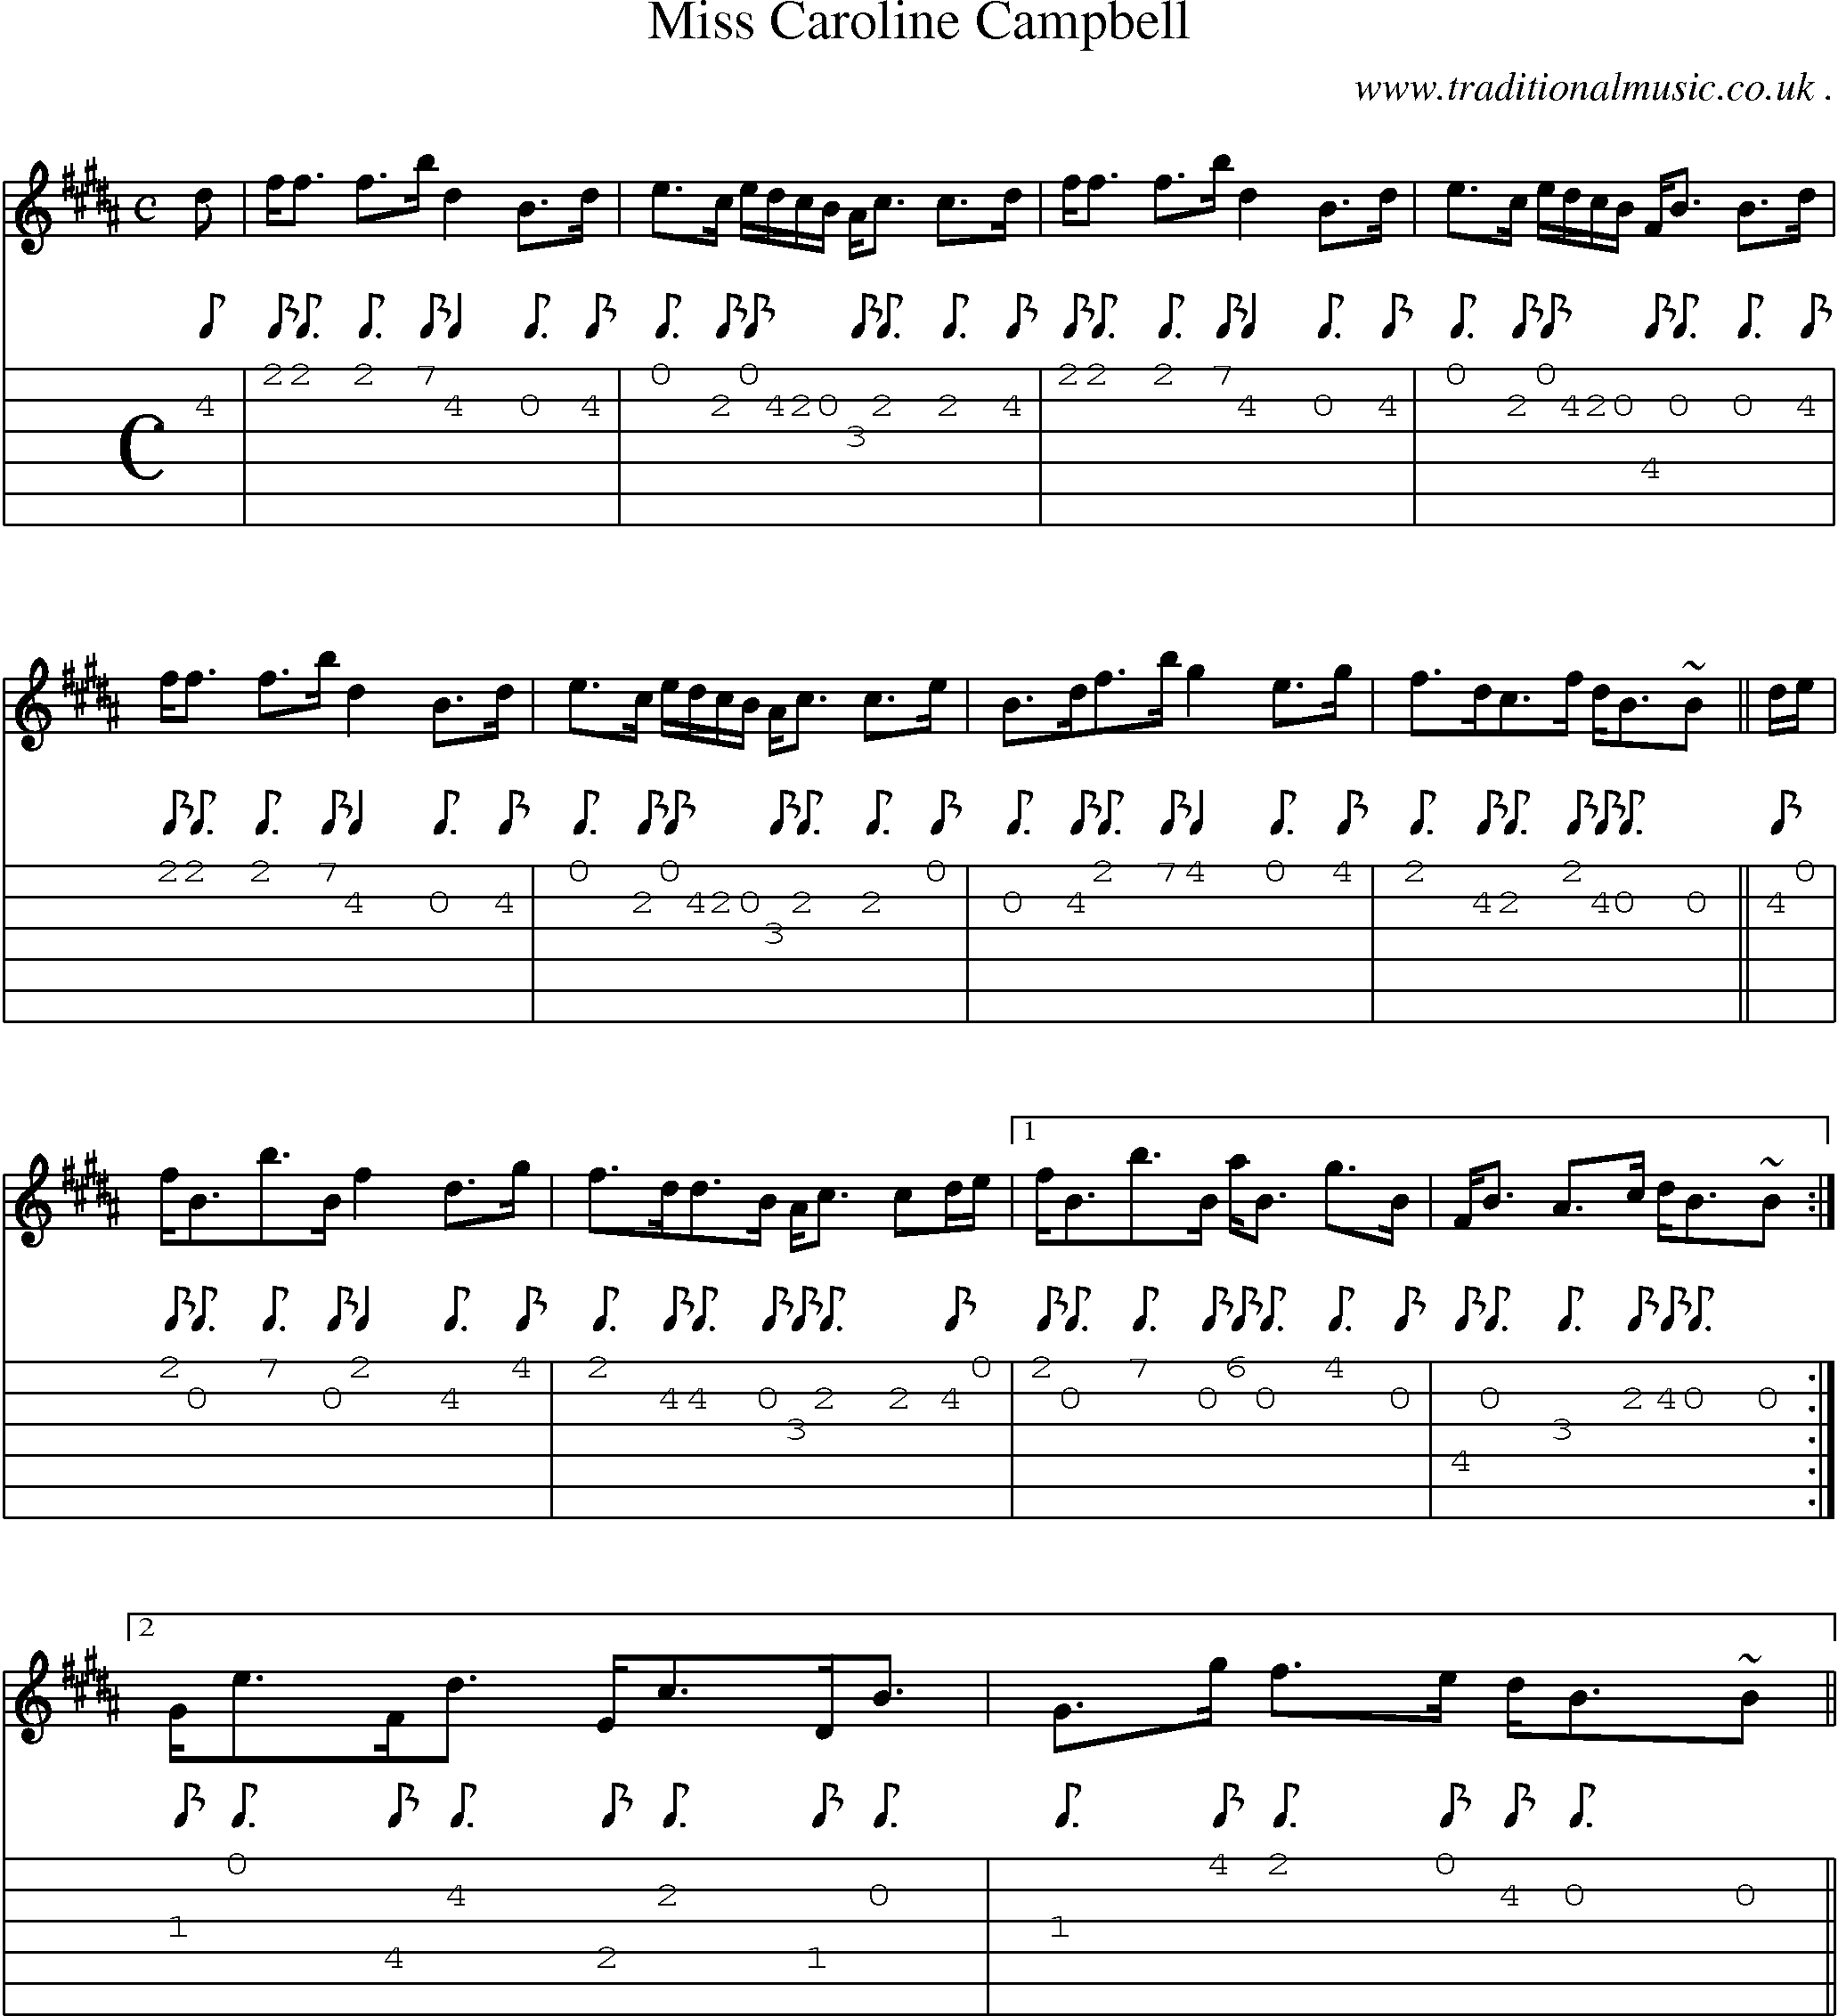 Sheet-music  score, Chords and Guitar Tabs for Miss Caroline Campbell